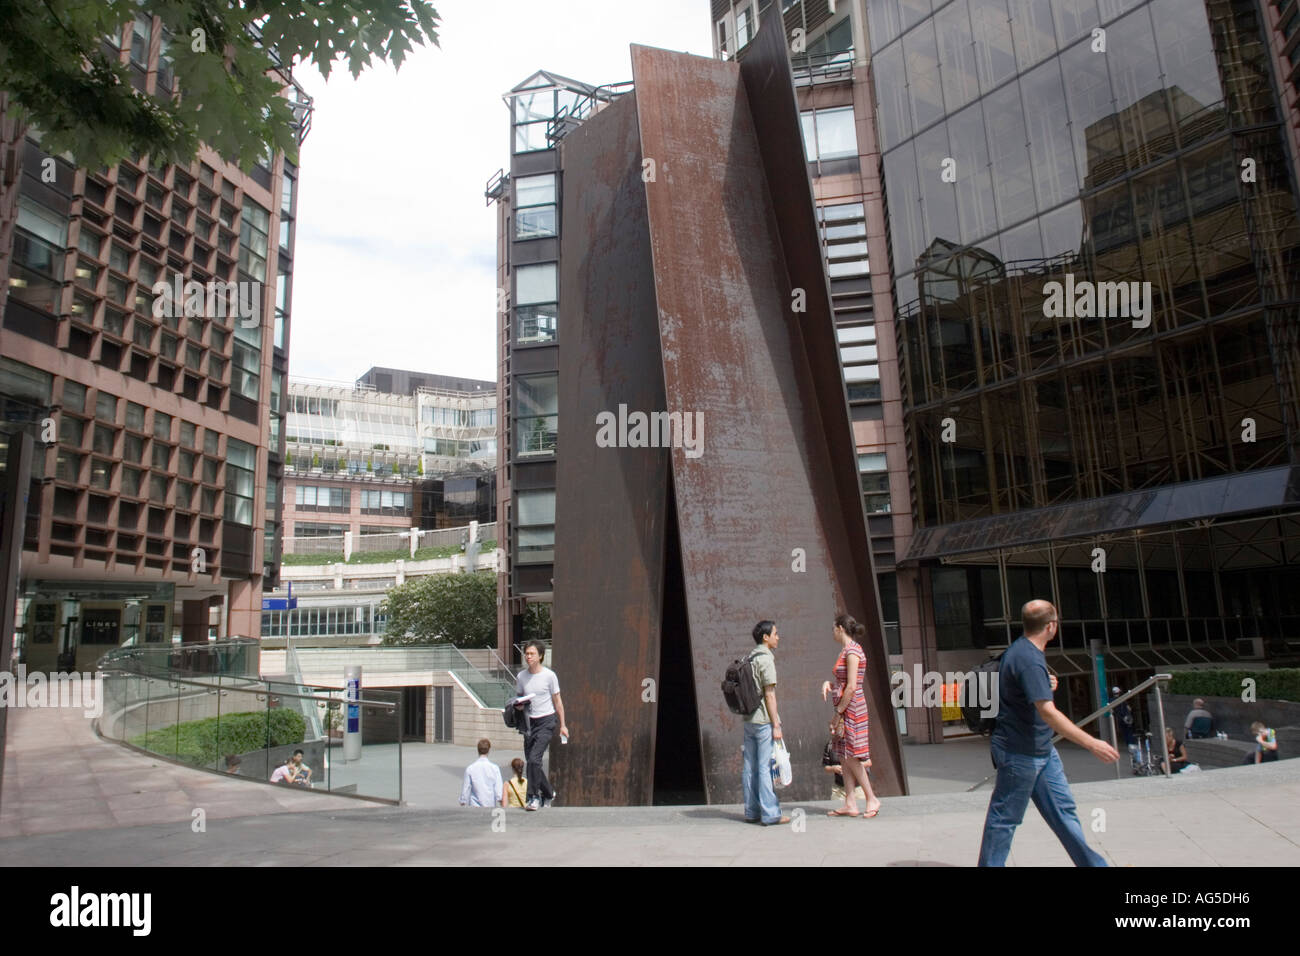 Sculpture entitled "Fulcrum" by American artist Richard Serra at the  entrance to Broadgate in the City of London GB UK Stock Photo - Alamy